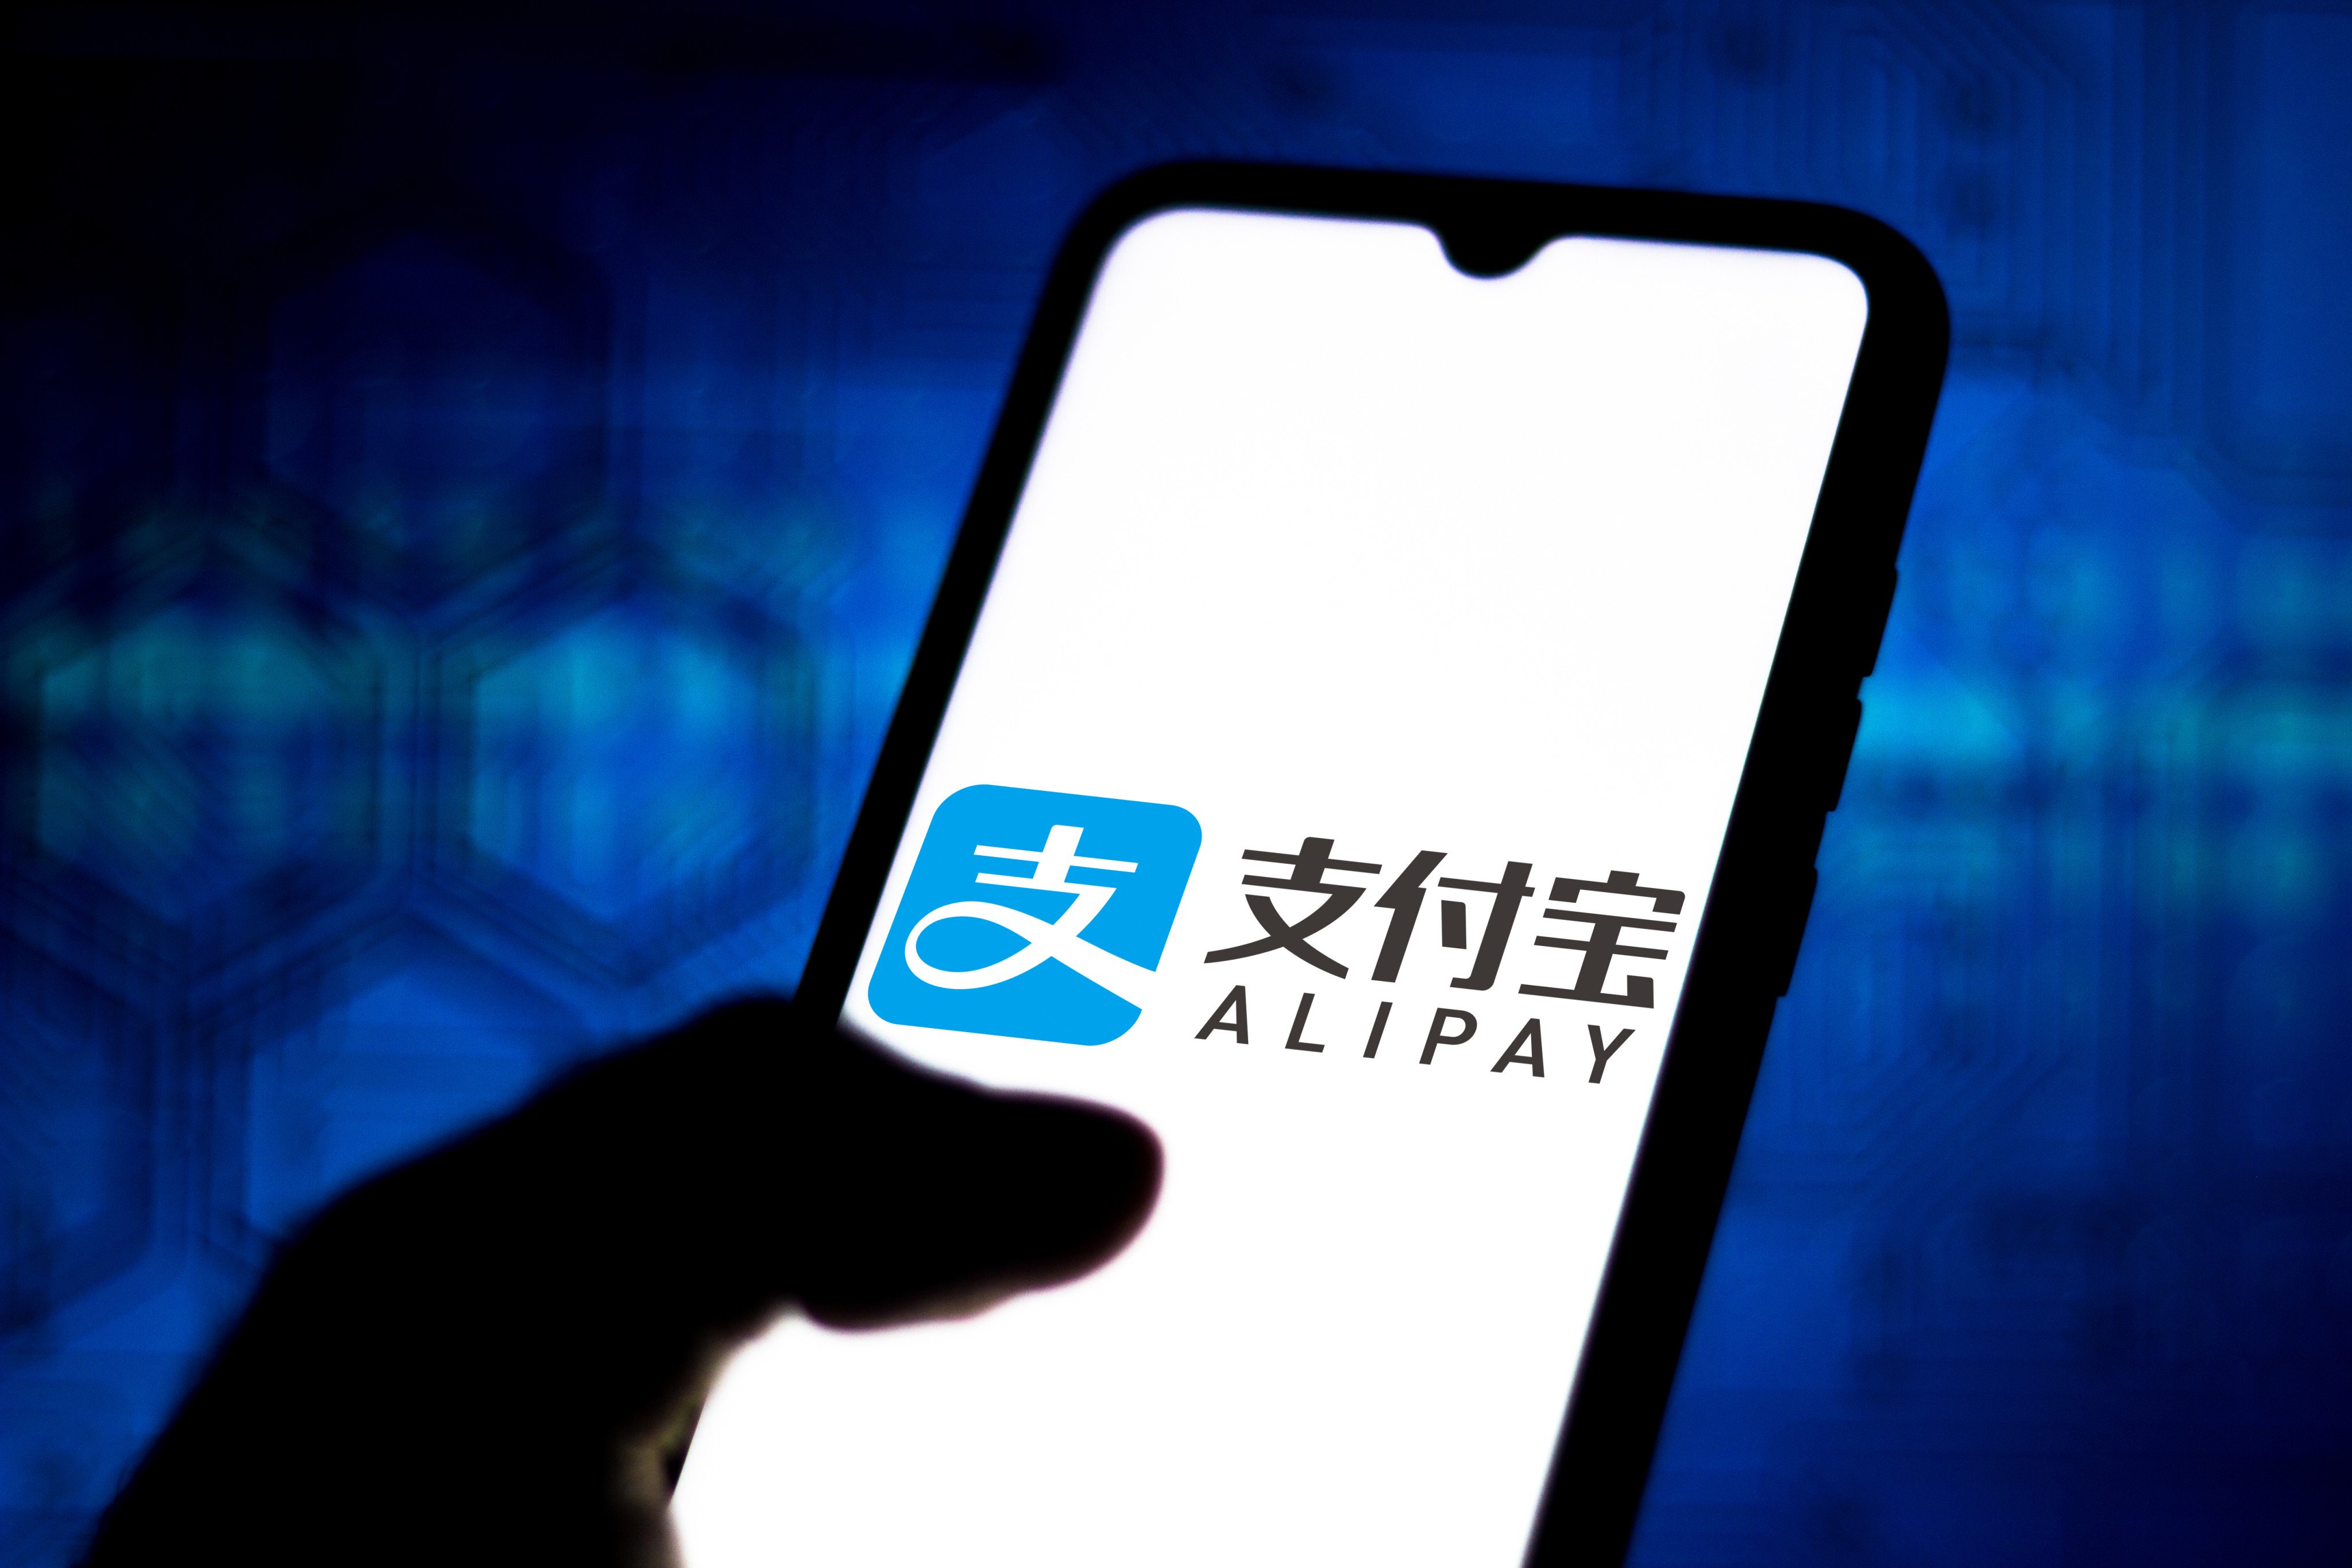 The collaboration between Ant Group and Huawei Technologies is expected to benefit consumers who use Alipay and the Chinese tech giant’s devices across different scenarios. Photo: Shutterstock